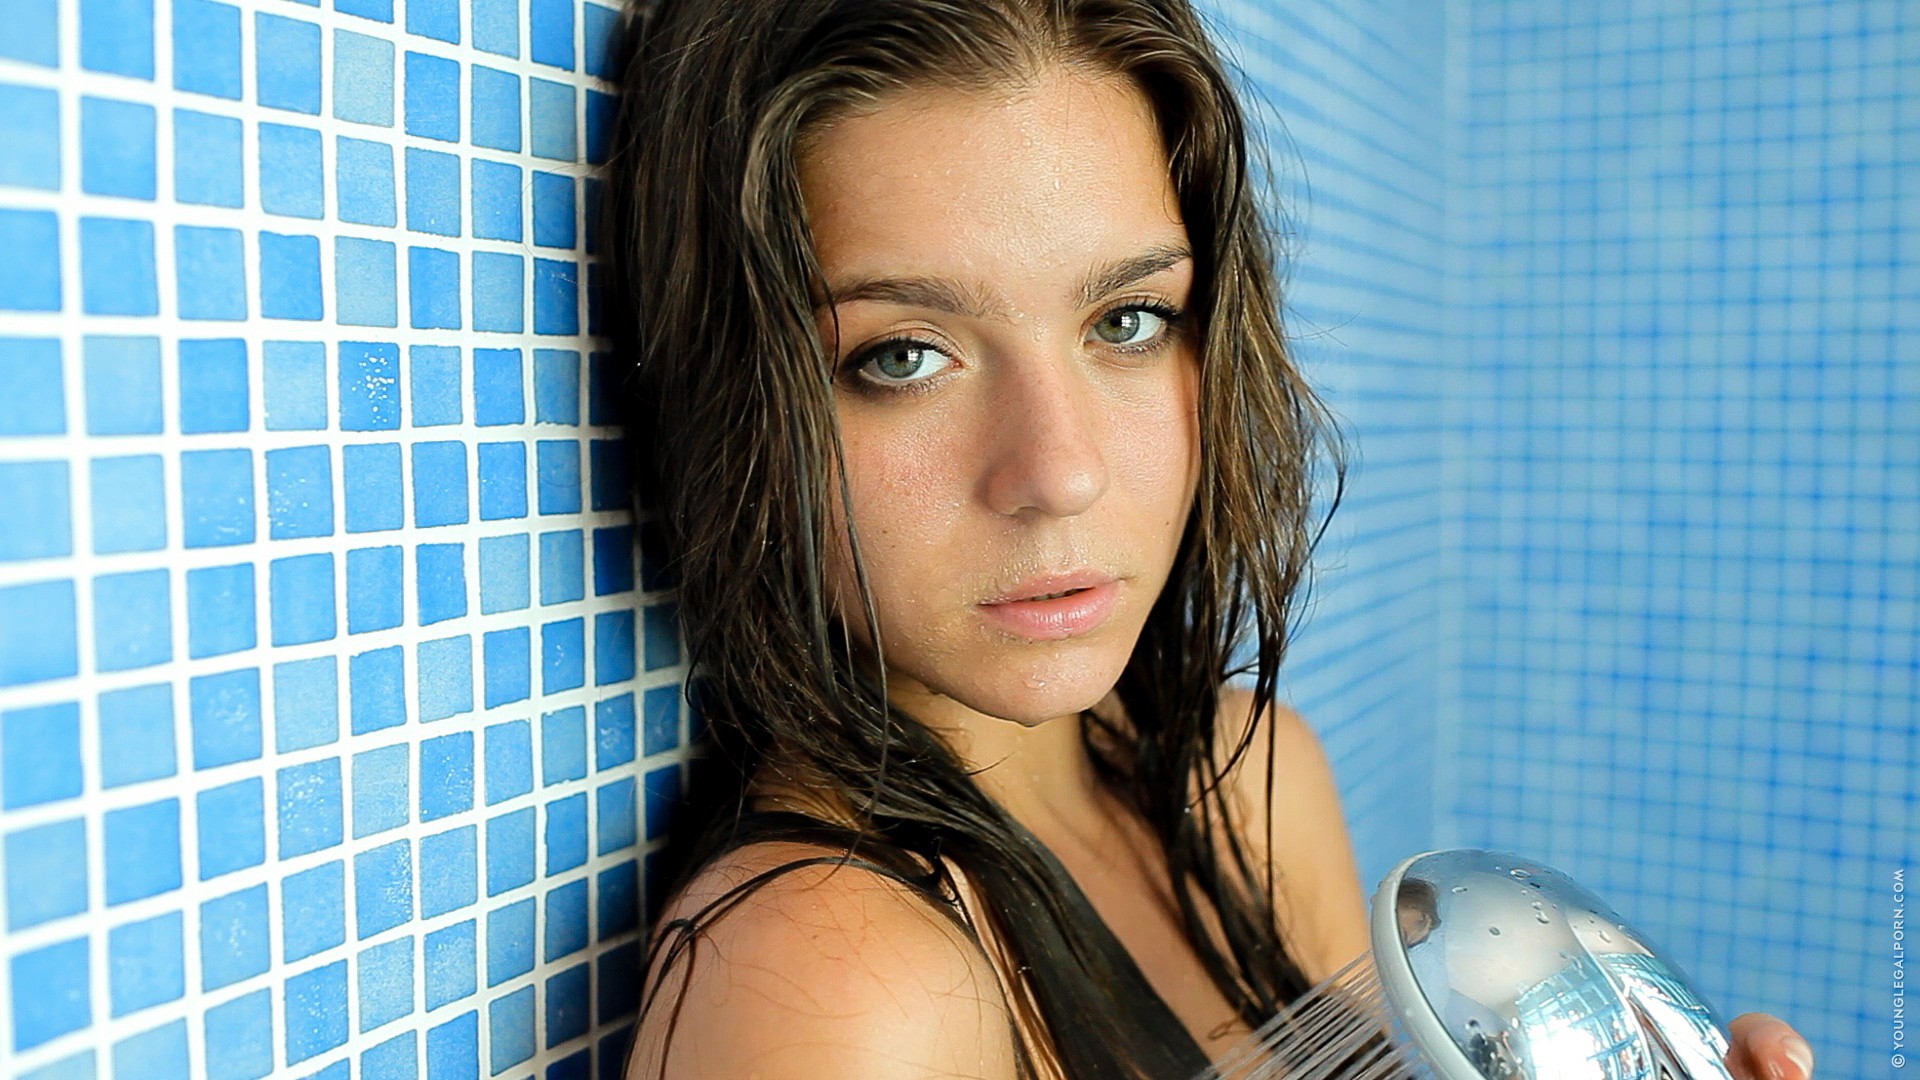 Green Eyed Brunette Is In The Shower Wallpapers And Images Wallpapers Pictures Photos